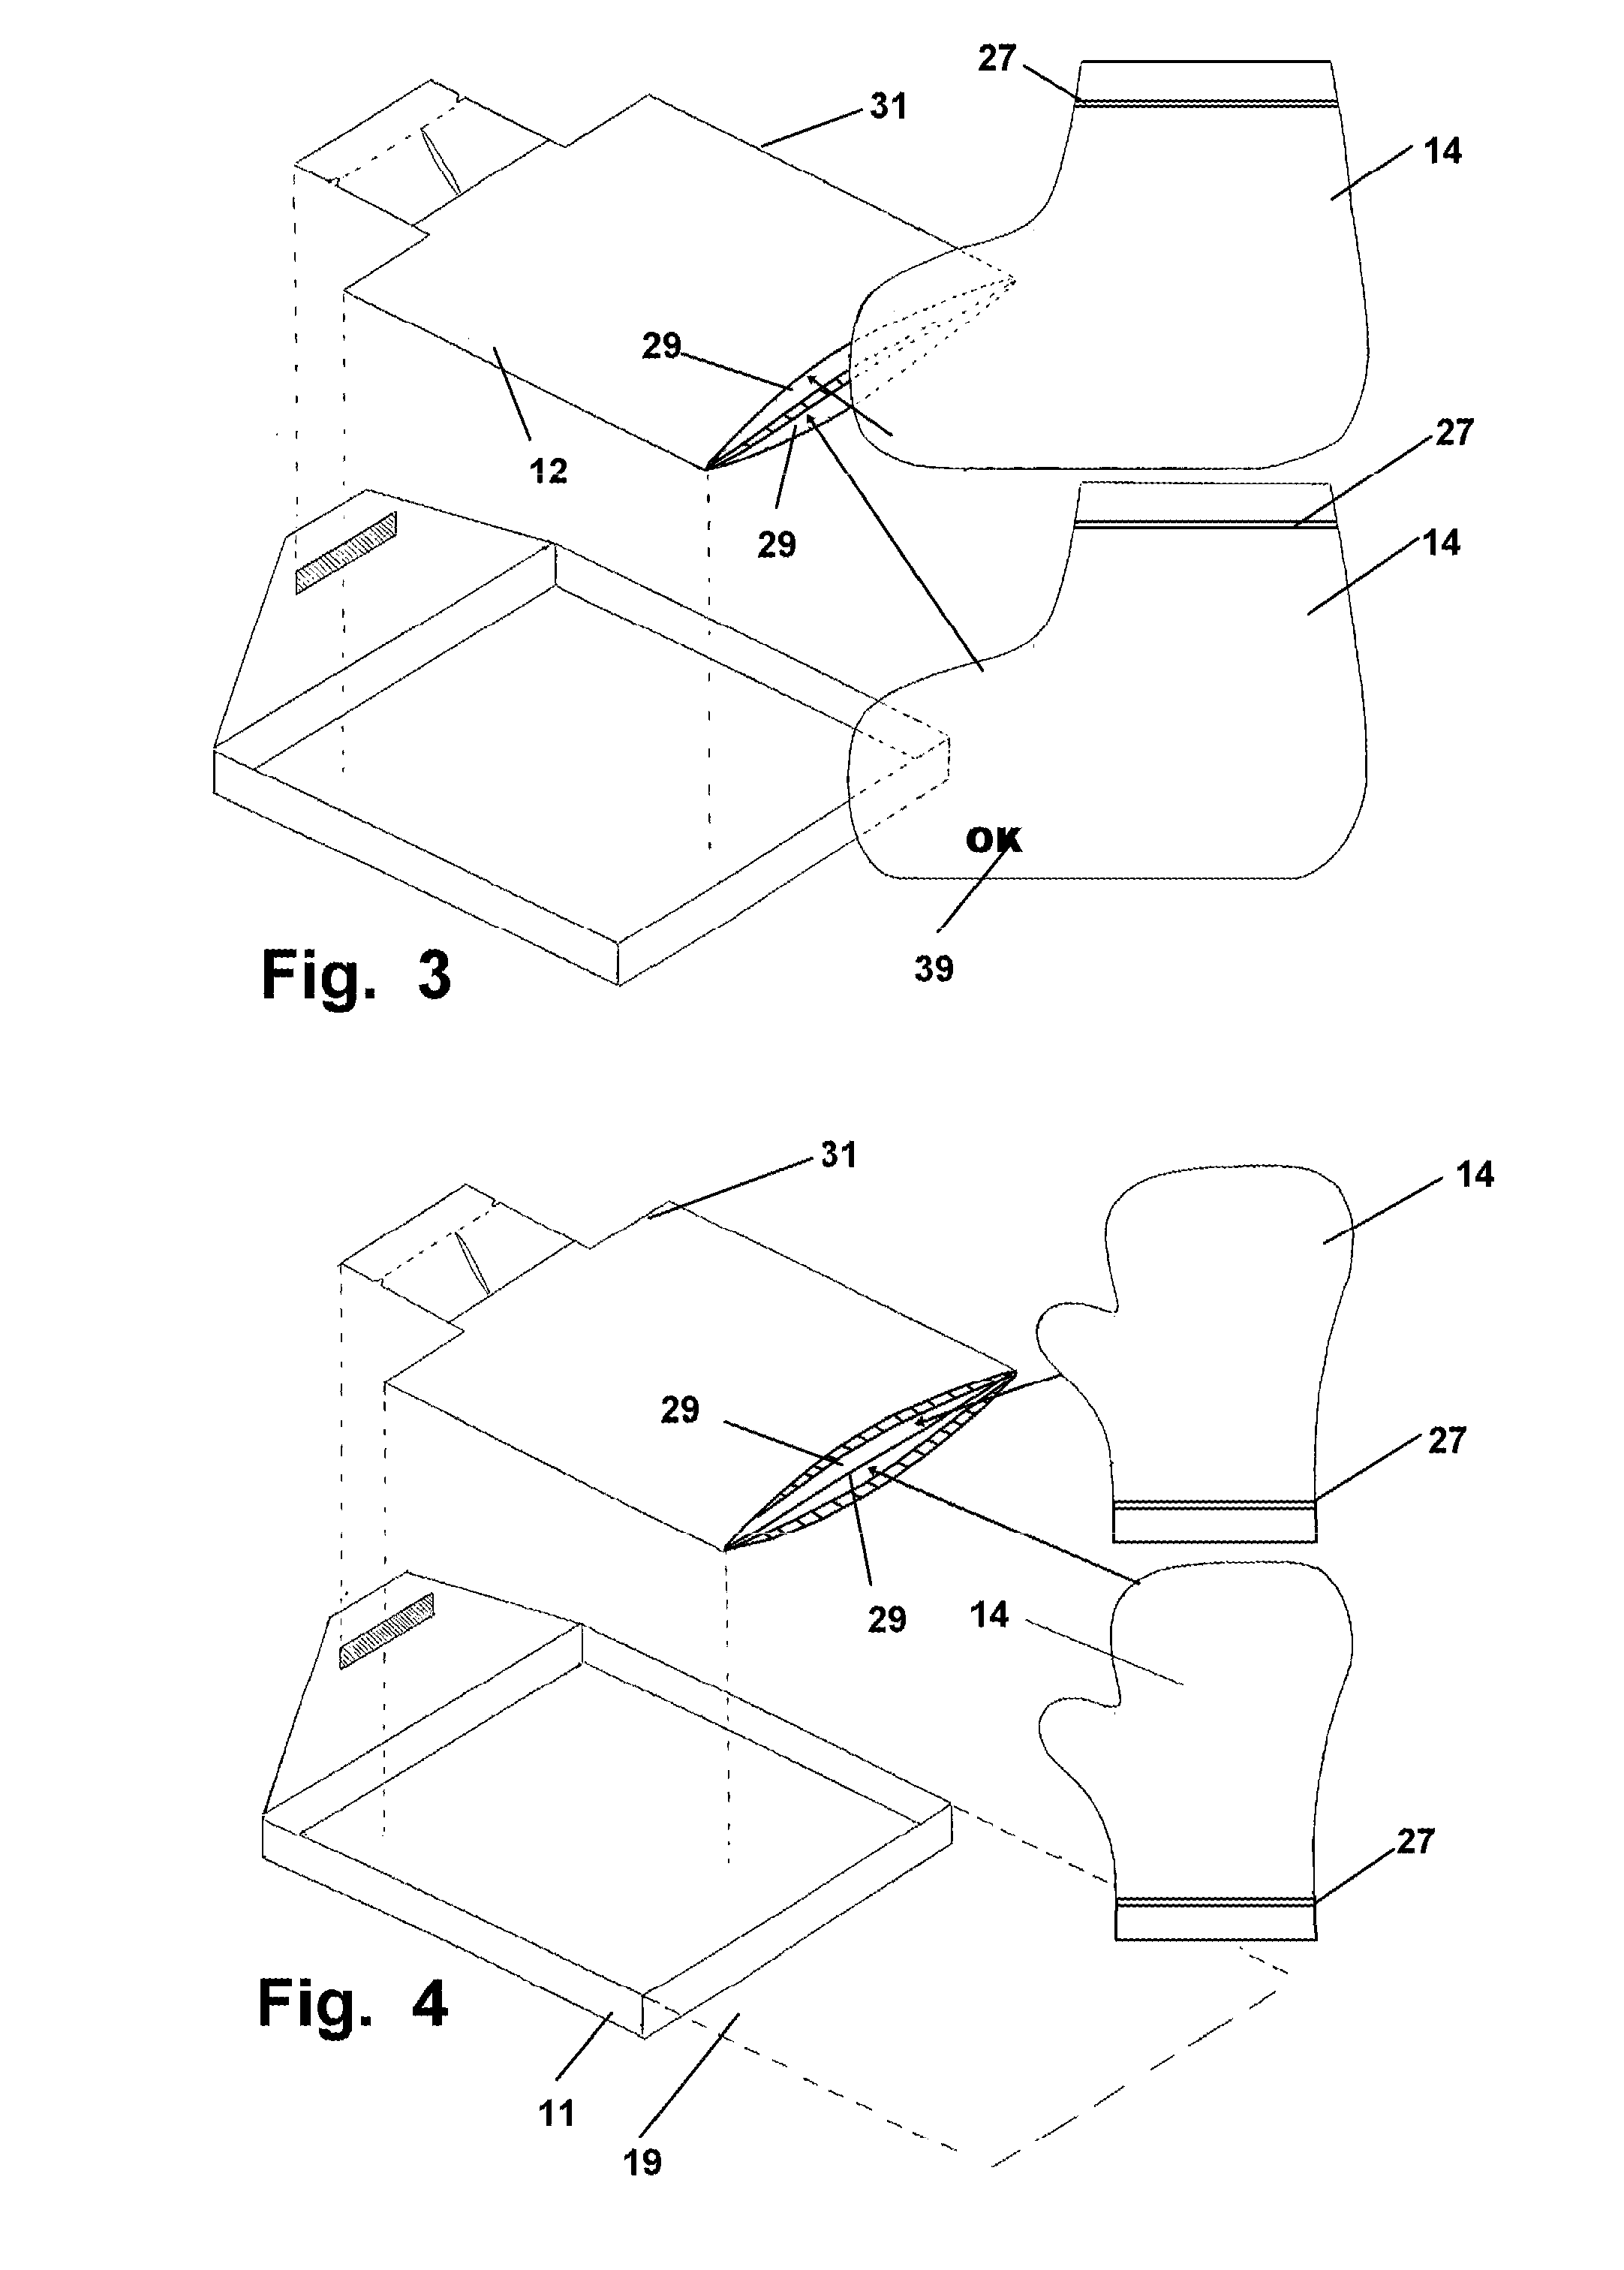 Method and apparatus of paraffin treatment of the skin